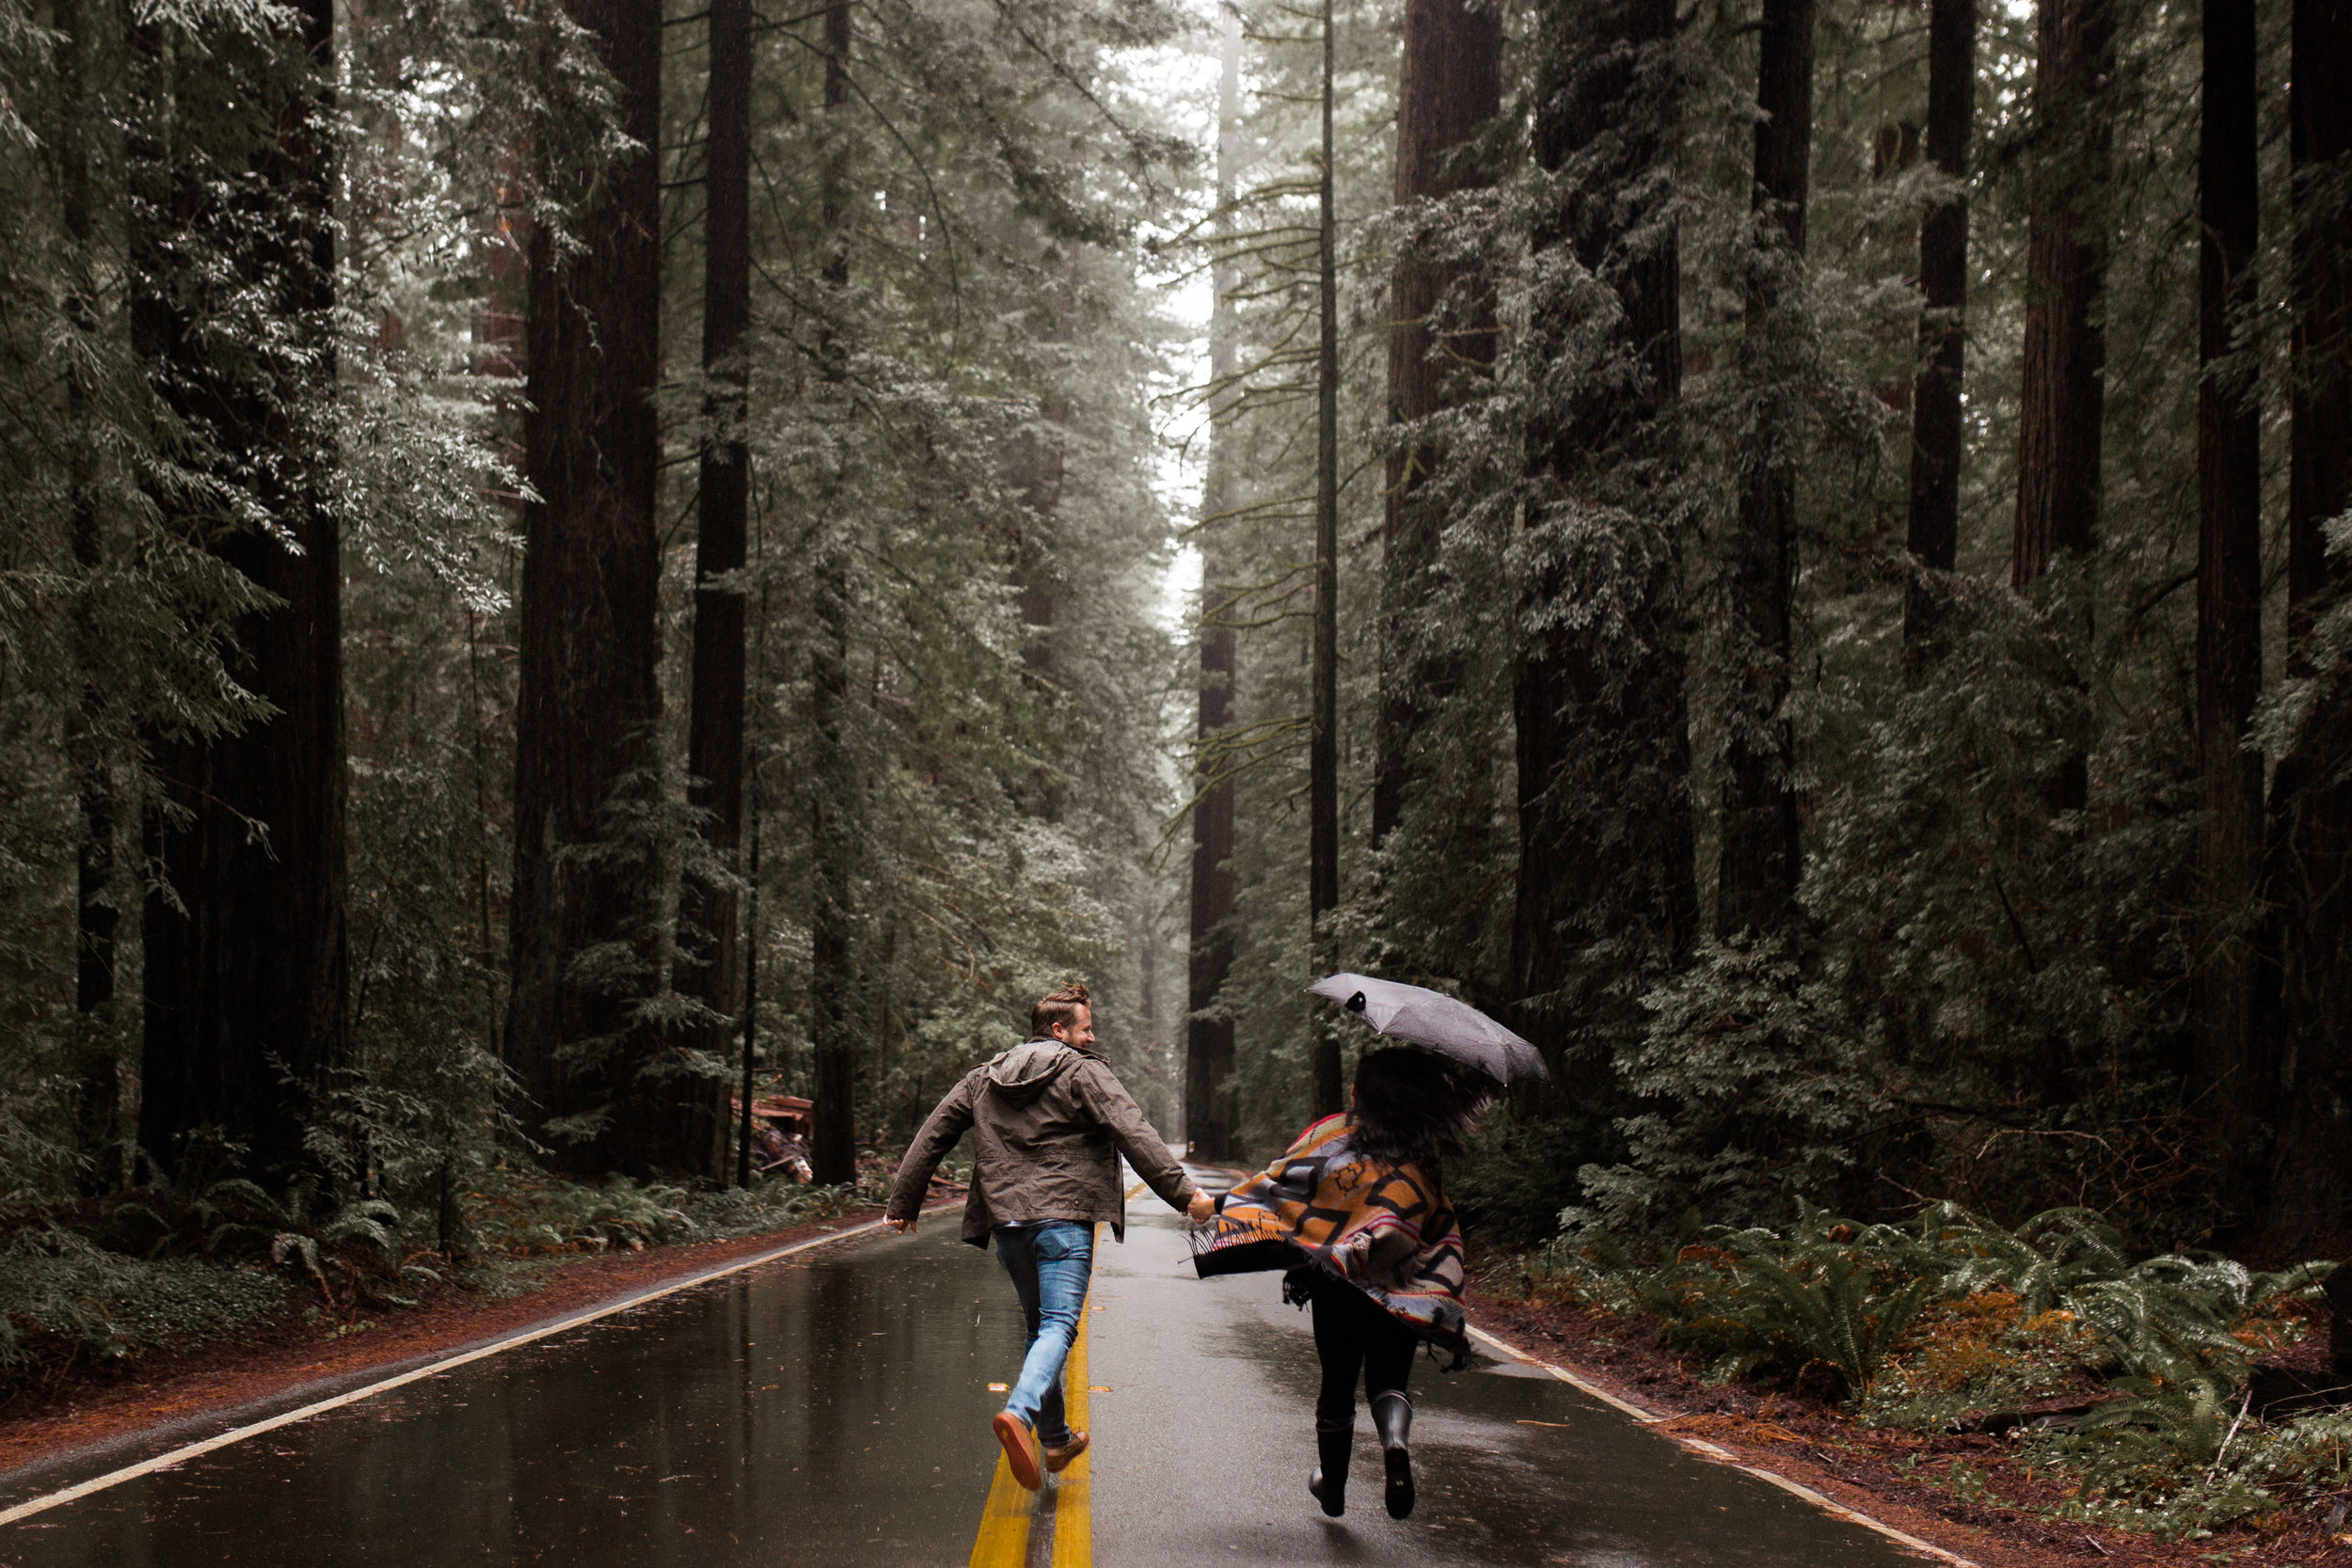 nicole-daacke-photography-redwoods-national-park-forest-rainy-foggy-adventure-engagement-session-humboldt-county-old-growth-redwood-tree-elopement-intimate-wedding-photographer-1.jpg